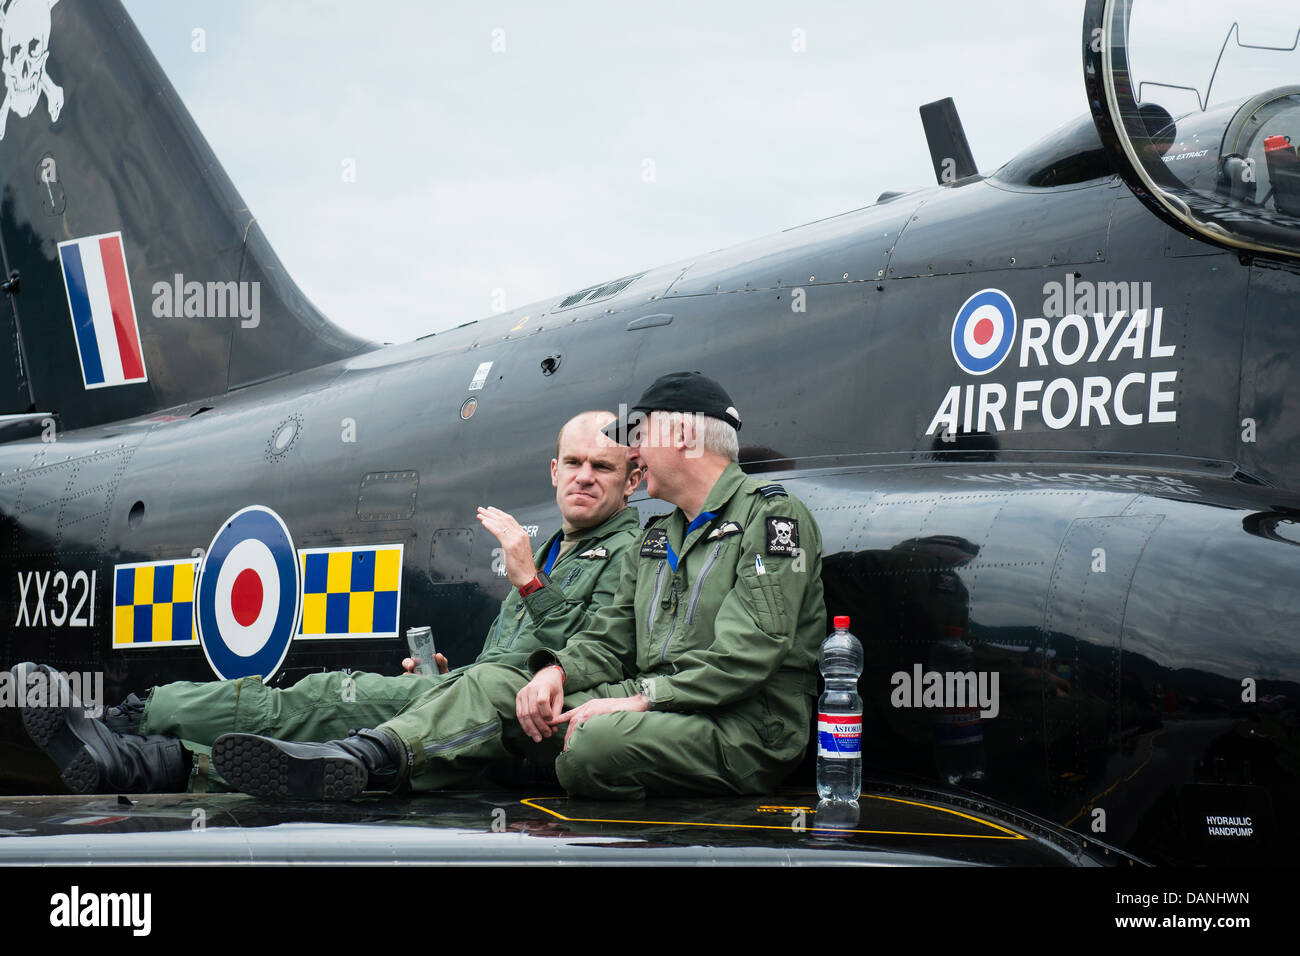 Pilots of BAE Hawk discuss on wing of airplane at Airpower 2013 airshow in Zeltweg, Austria Stock Photo